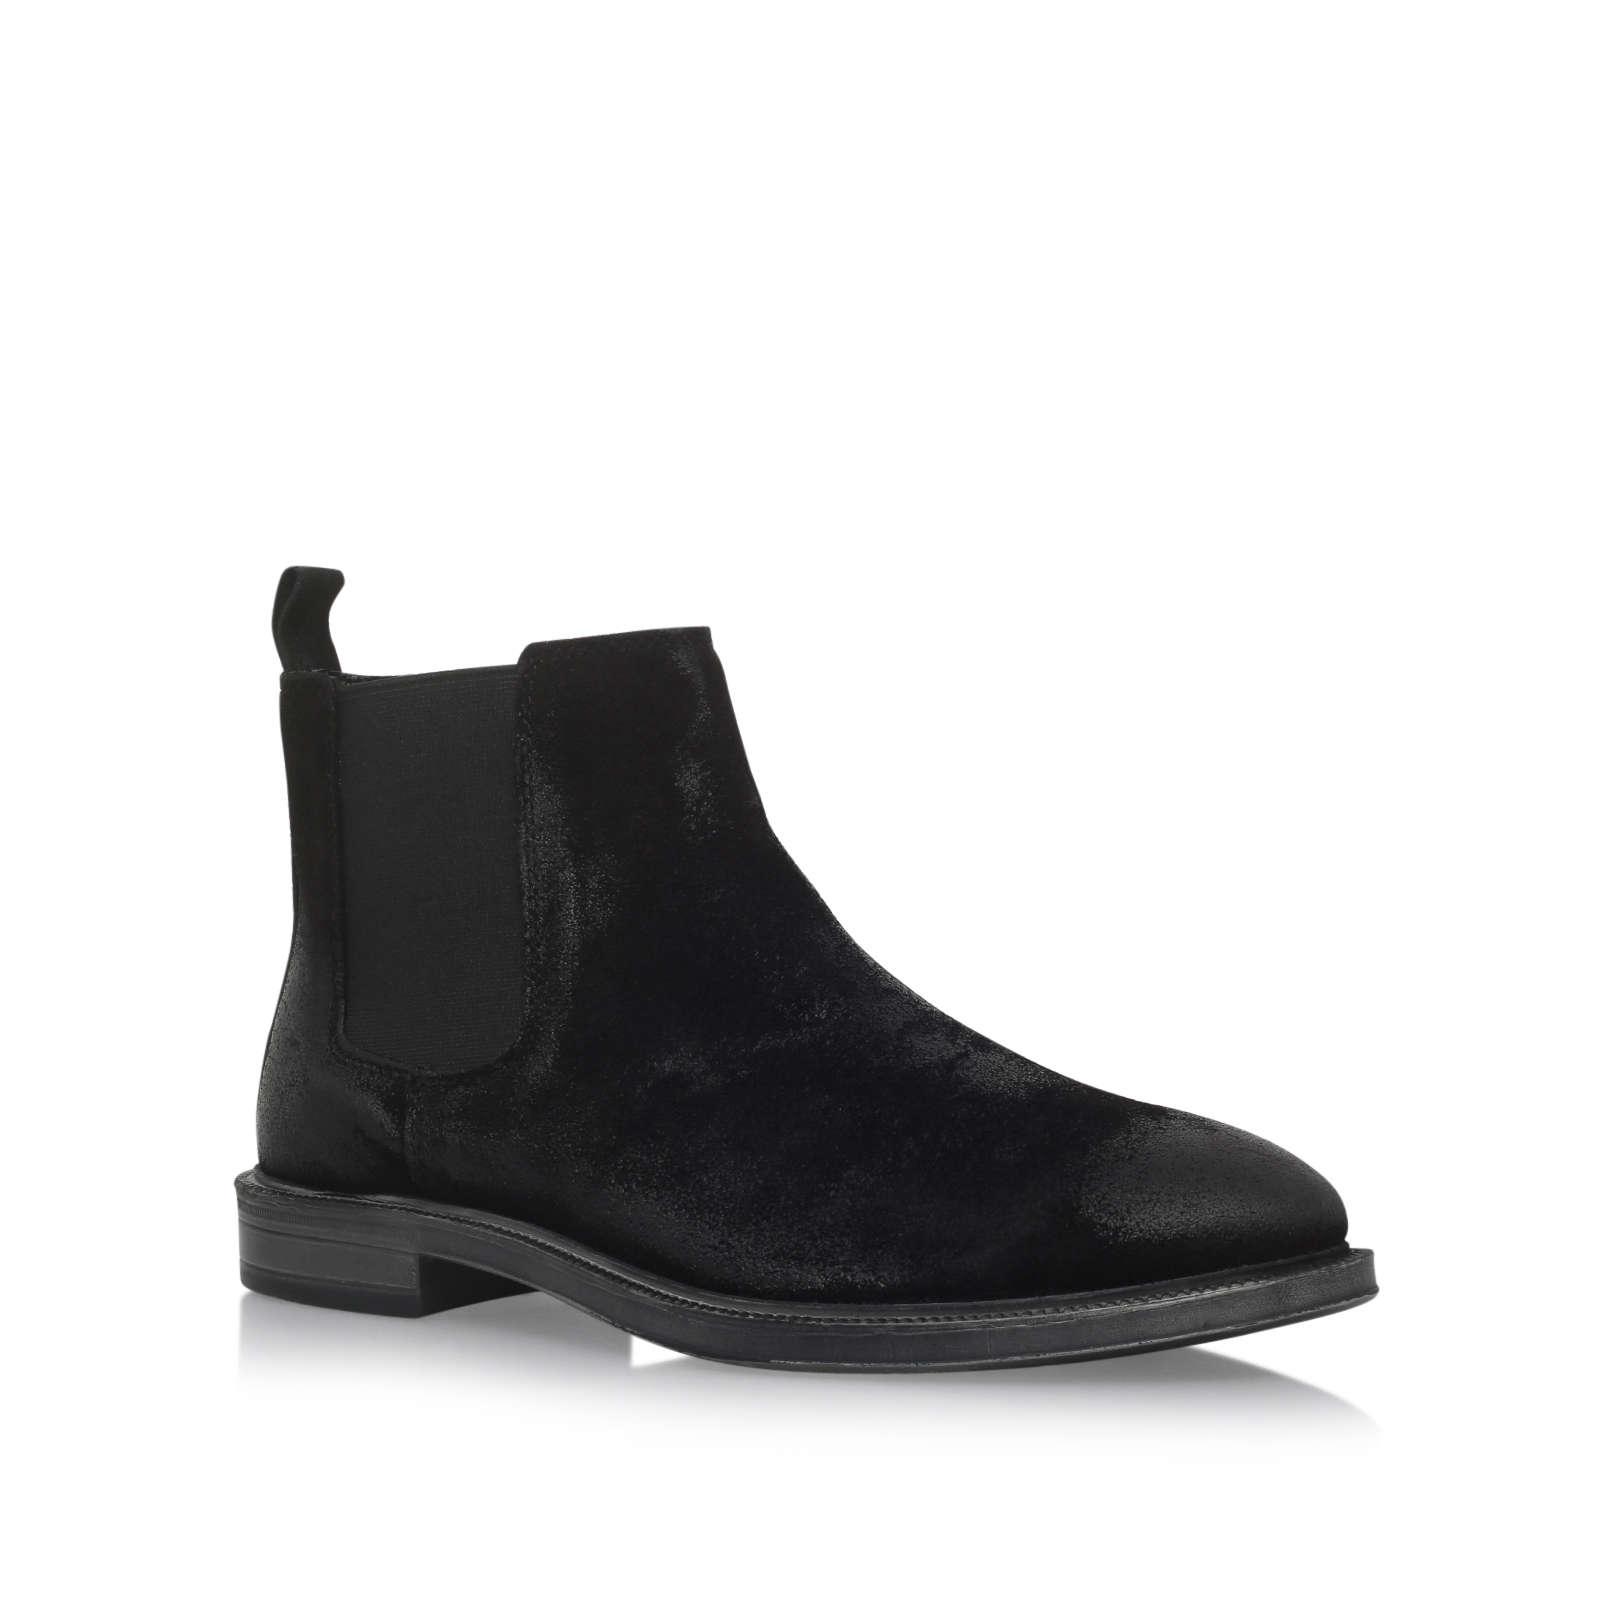 KG by Kurt Geiger Hadleigh Black Suede Chelsea Boots Chelsea Boot for ...